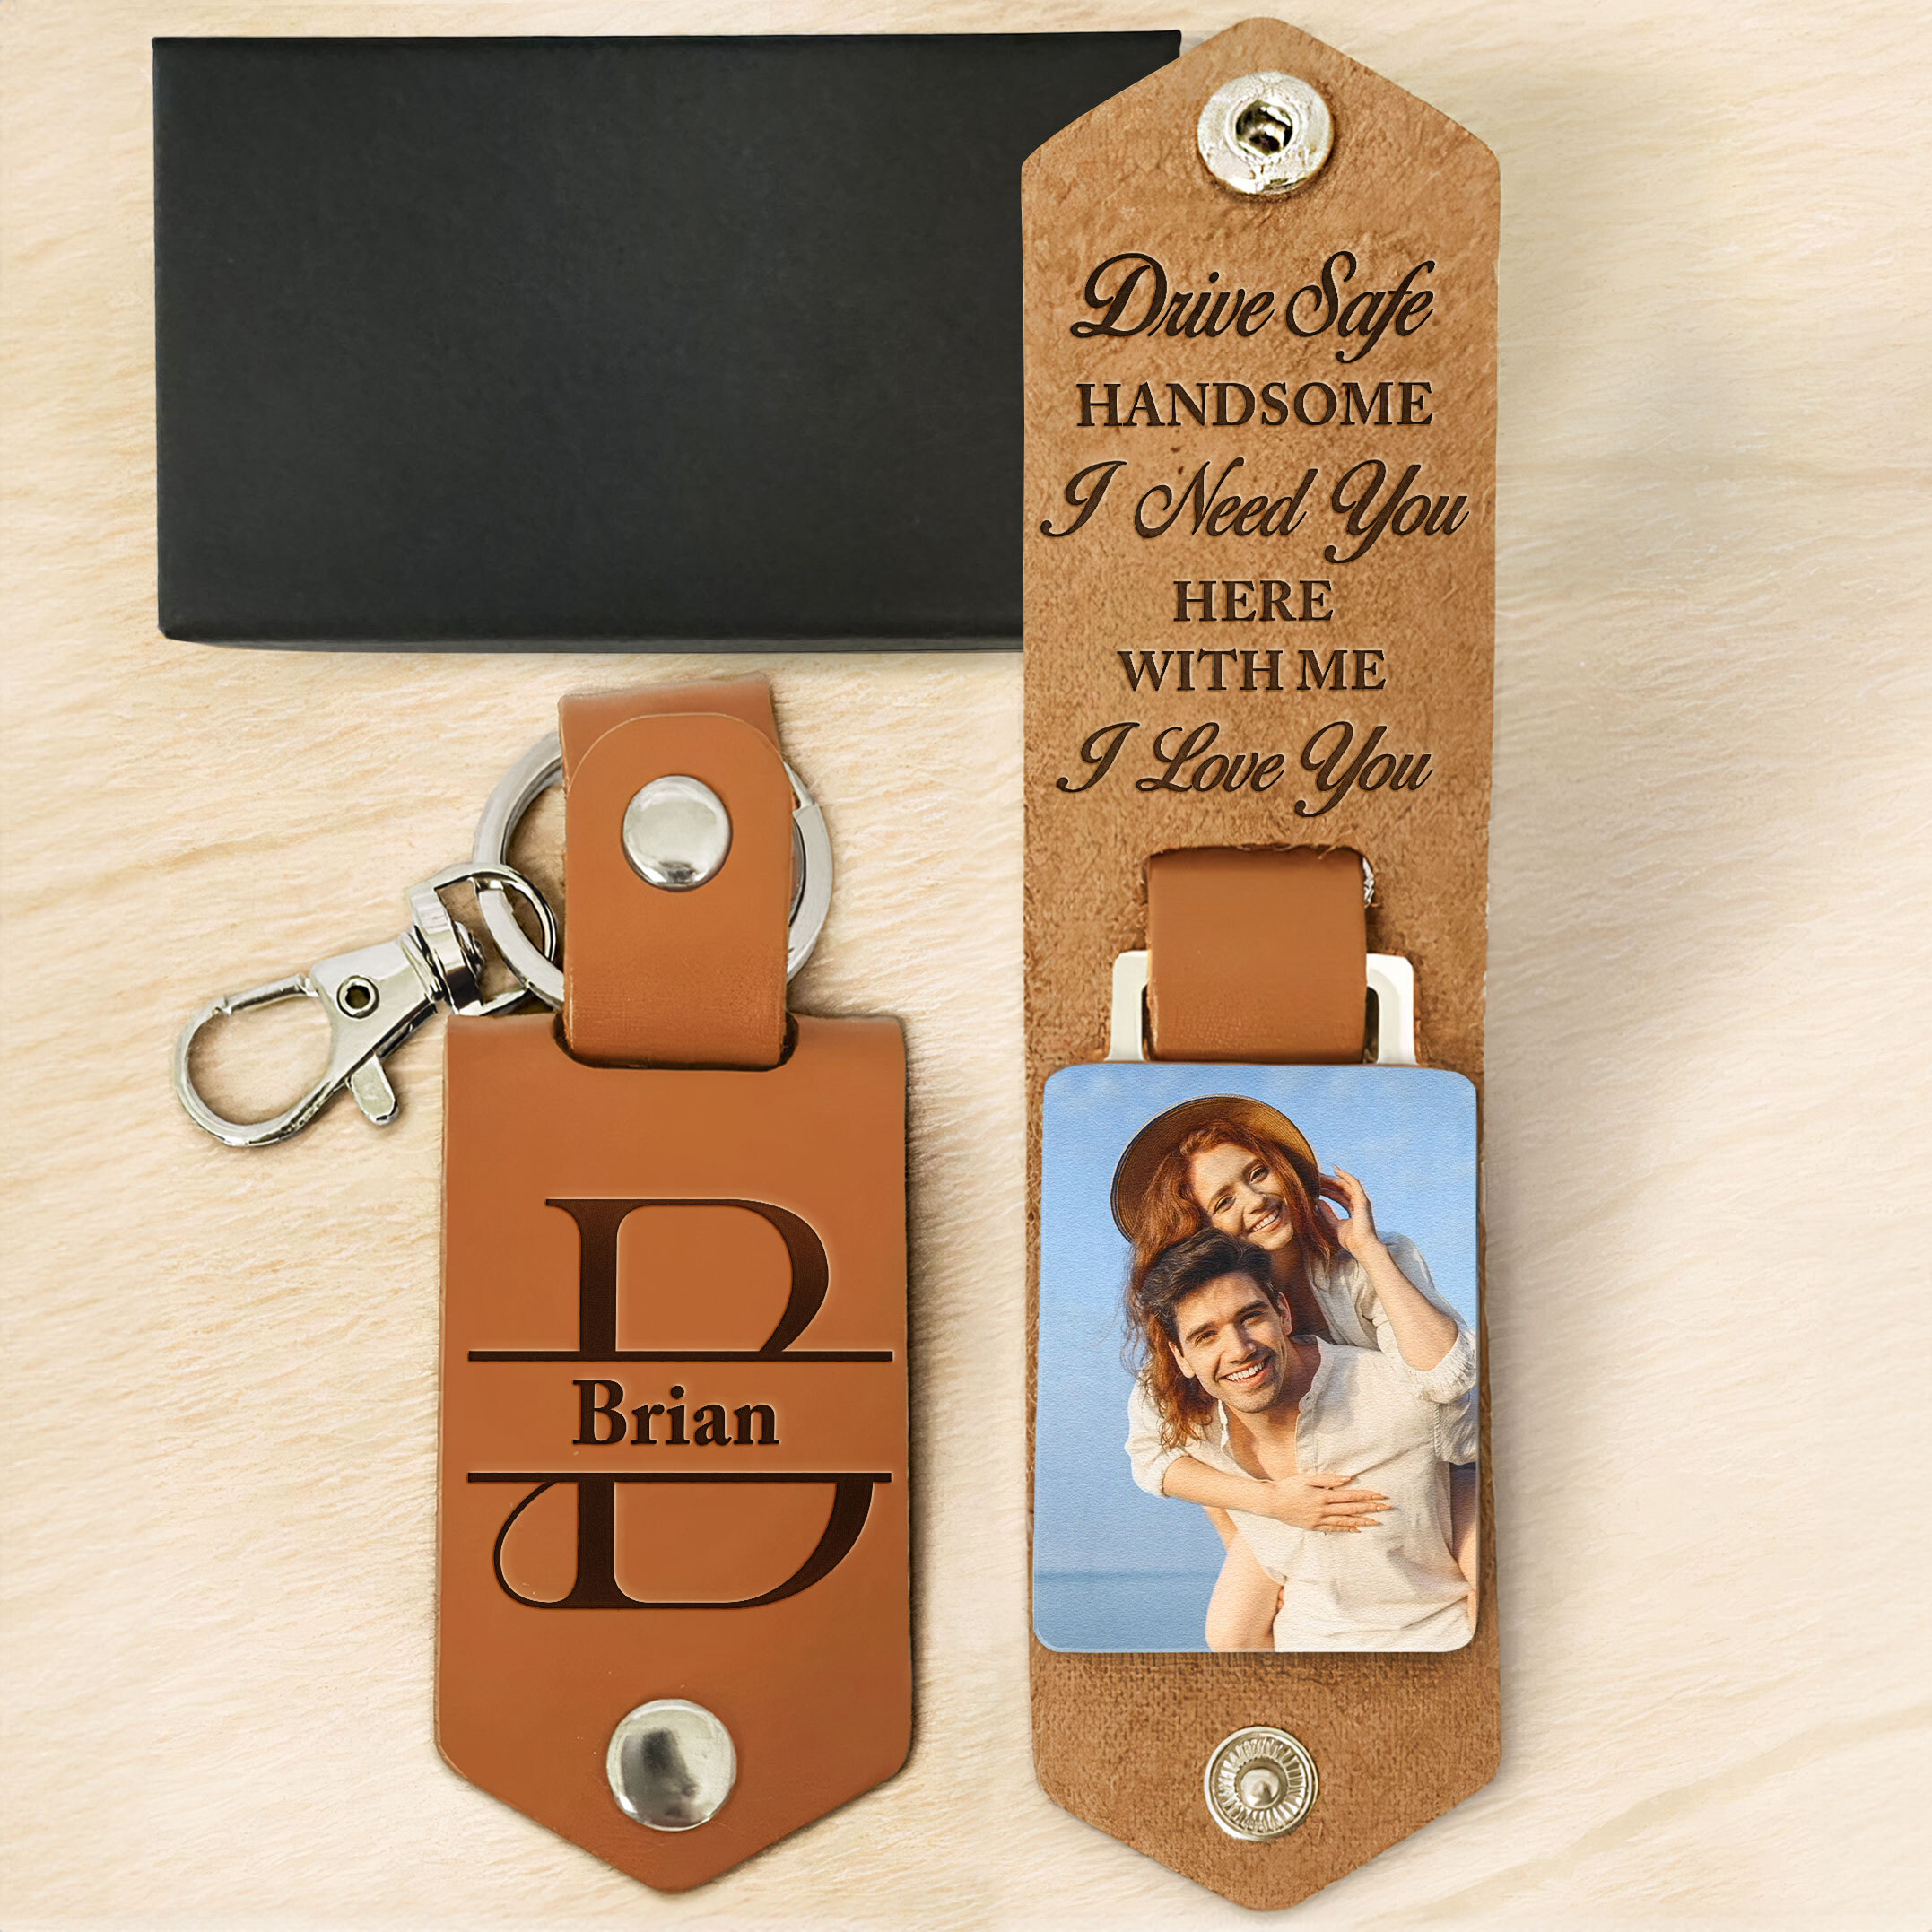 Drive Safe Handsome I Love You - Personalized Leather Photo Keychain